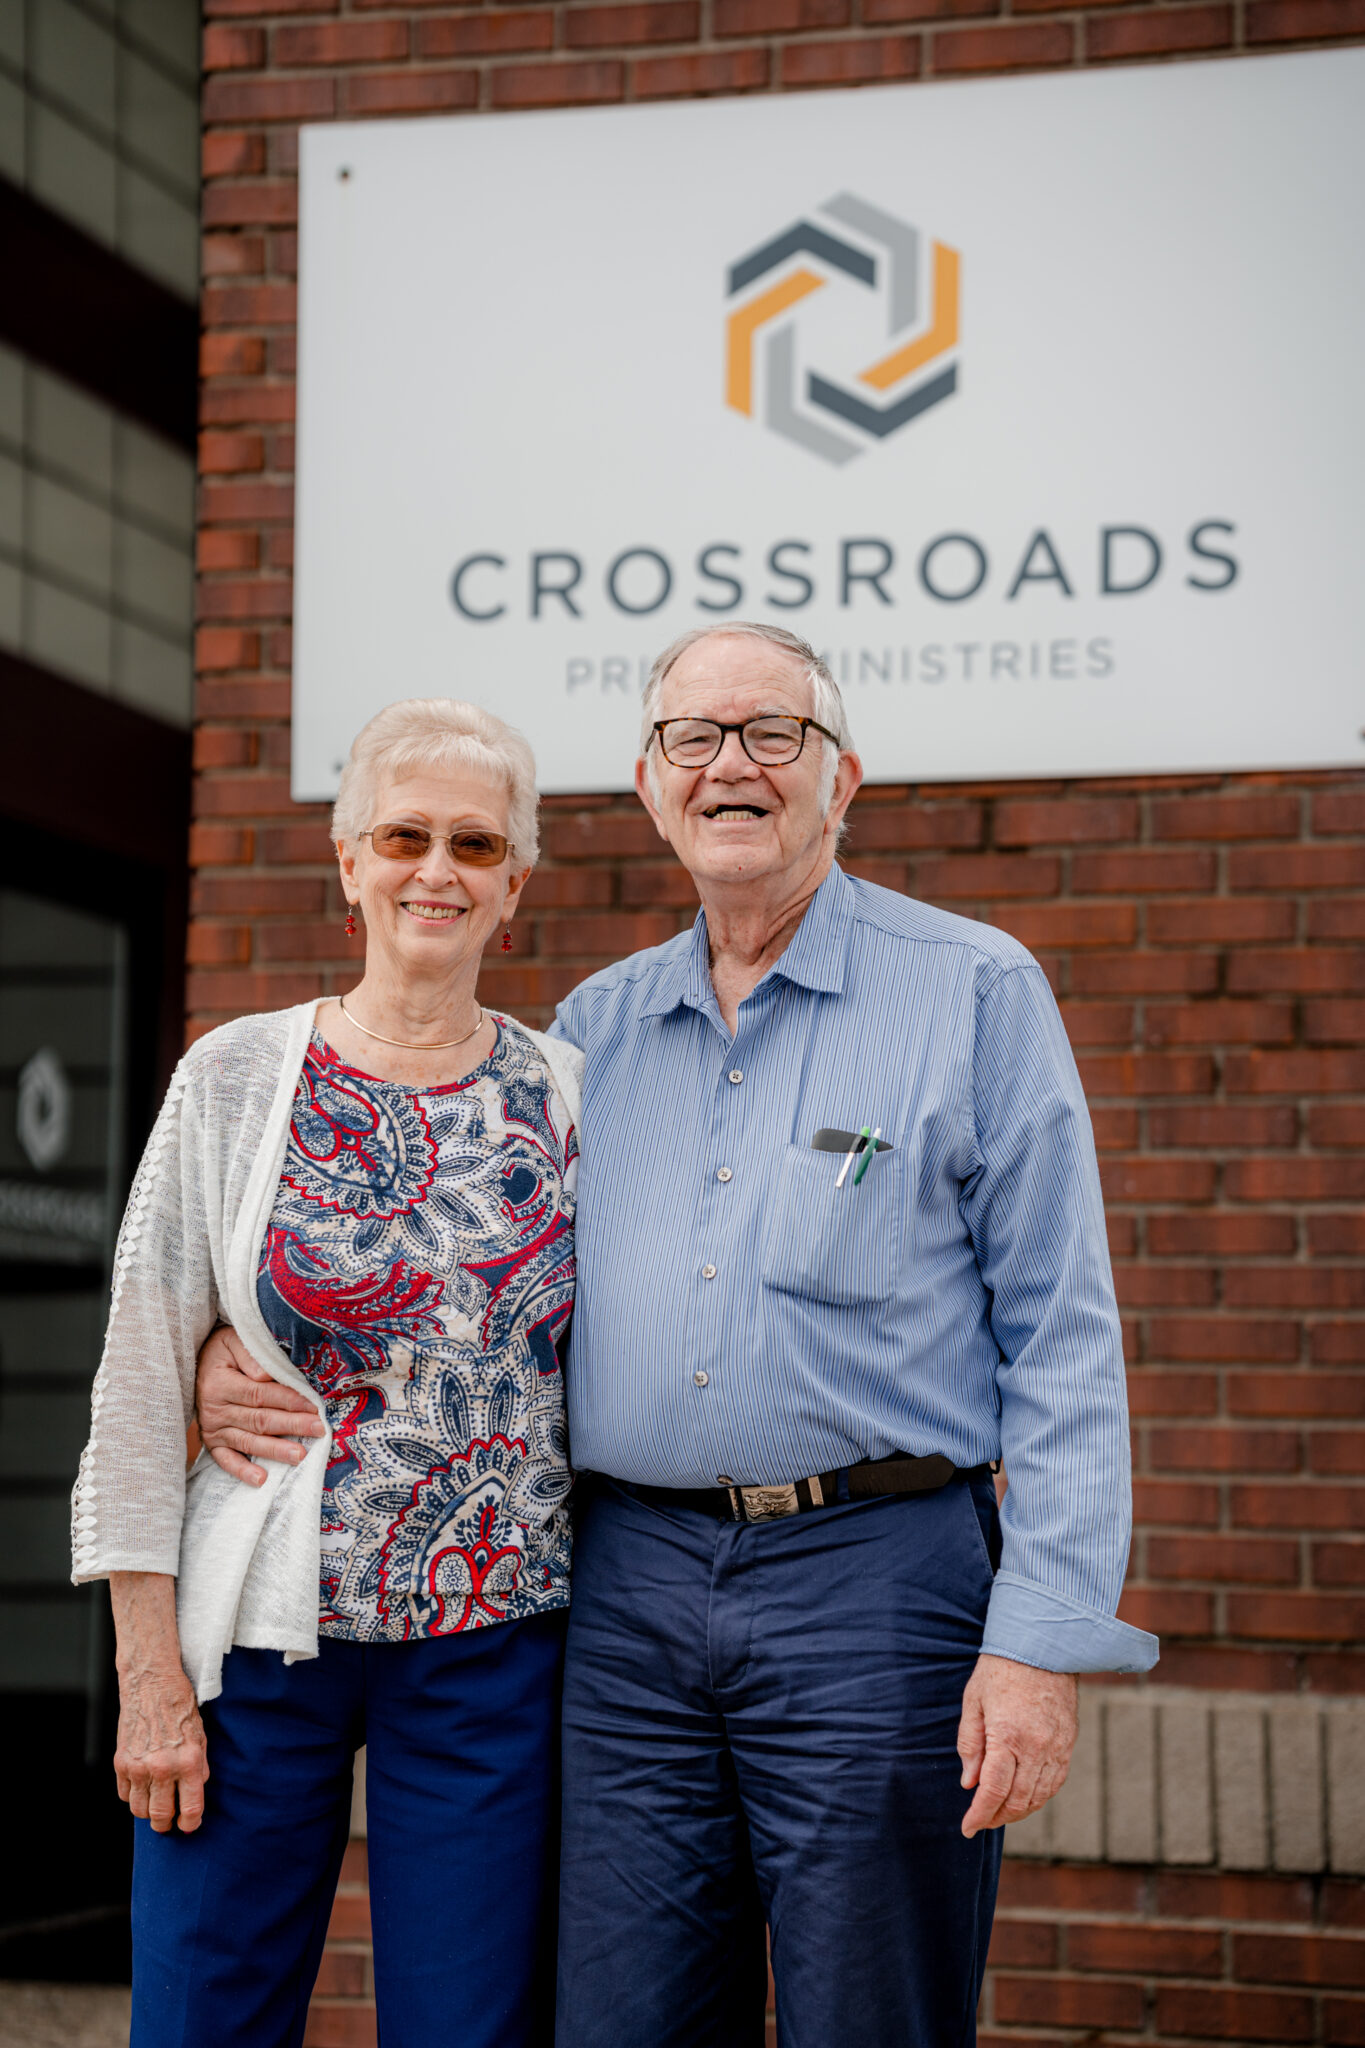 Don and Janet visit Crossroads office